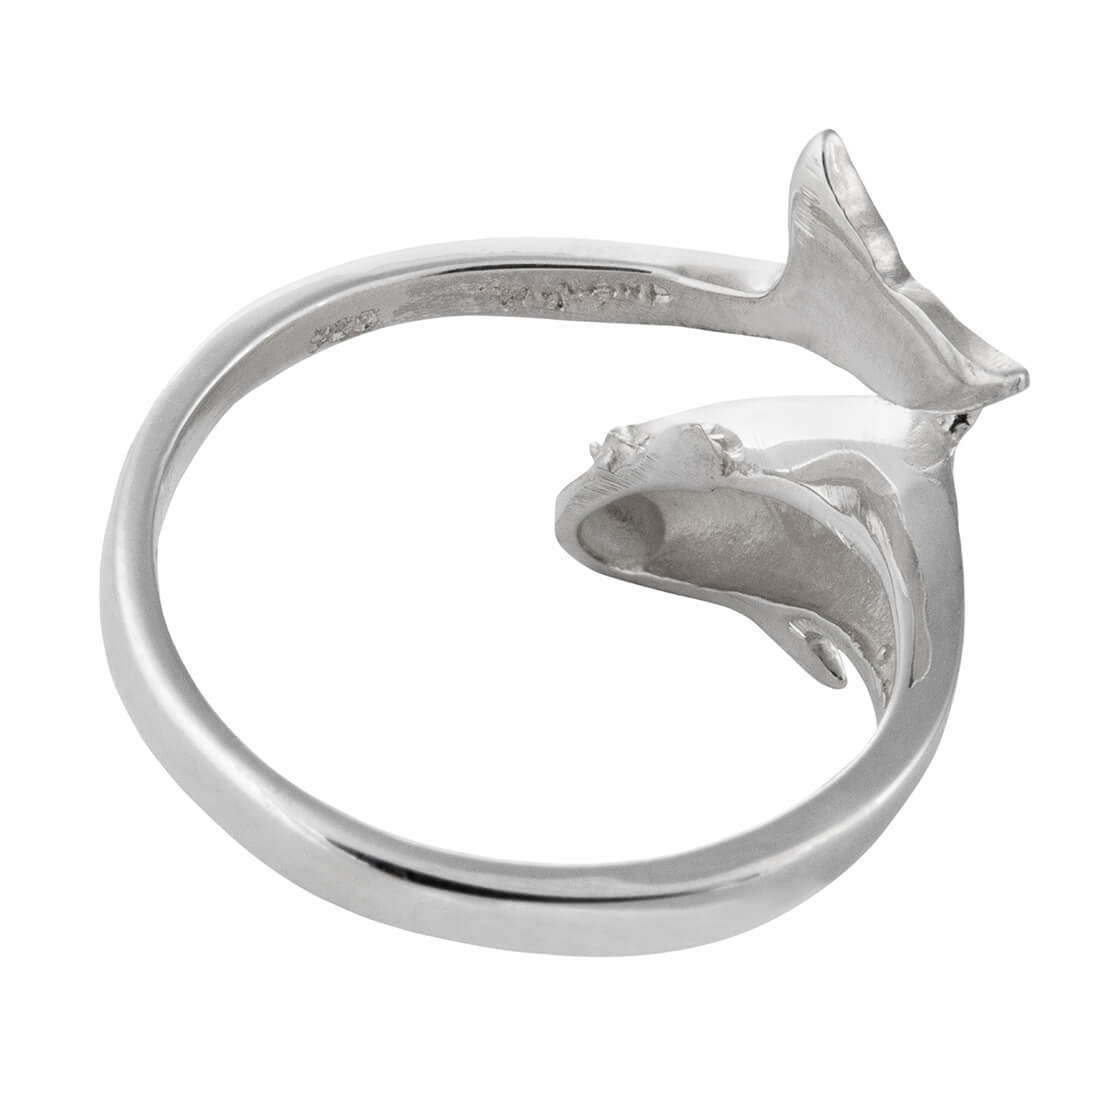 Sterling Silver Dolphin Wrap Ring - Choose Size 6, 7 or 8 - Wyland ...